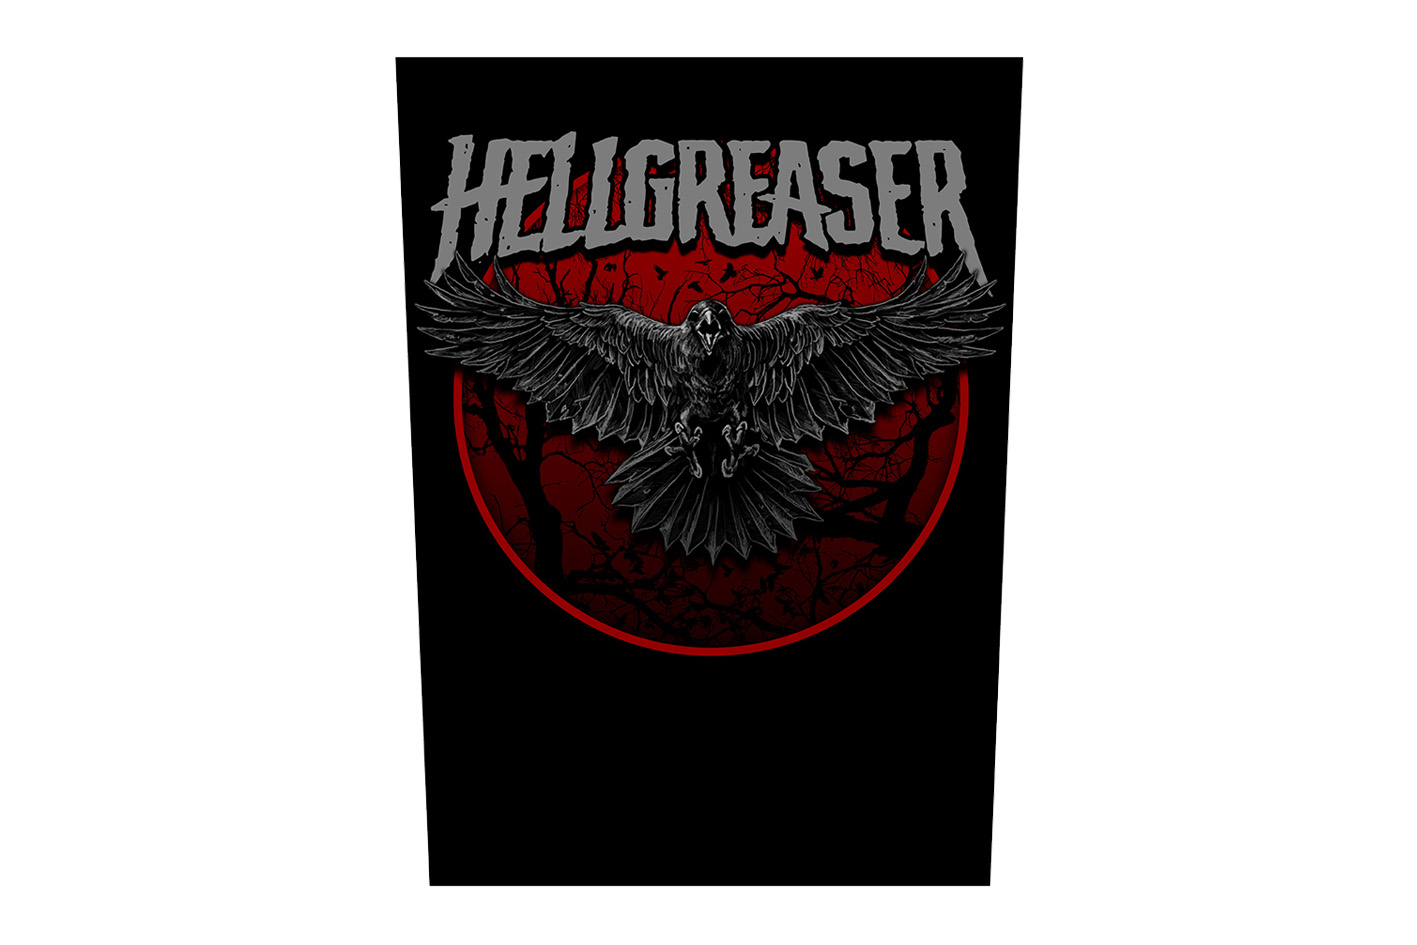 Hellgreaser - Backpatch